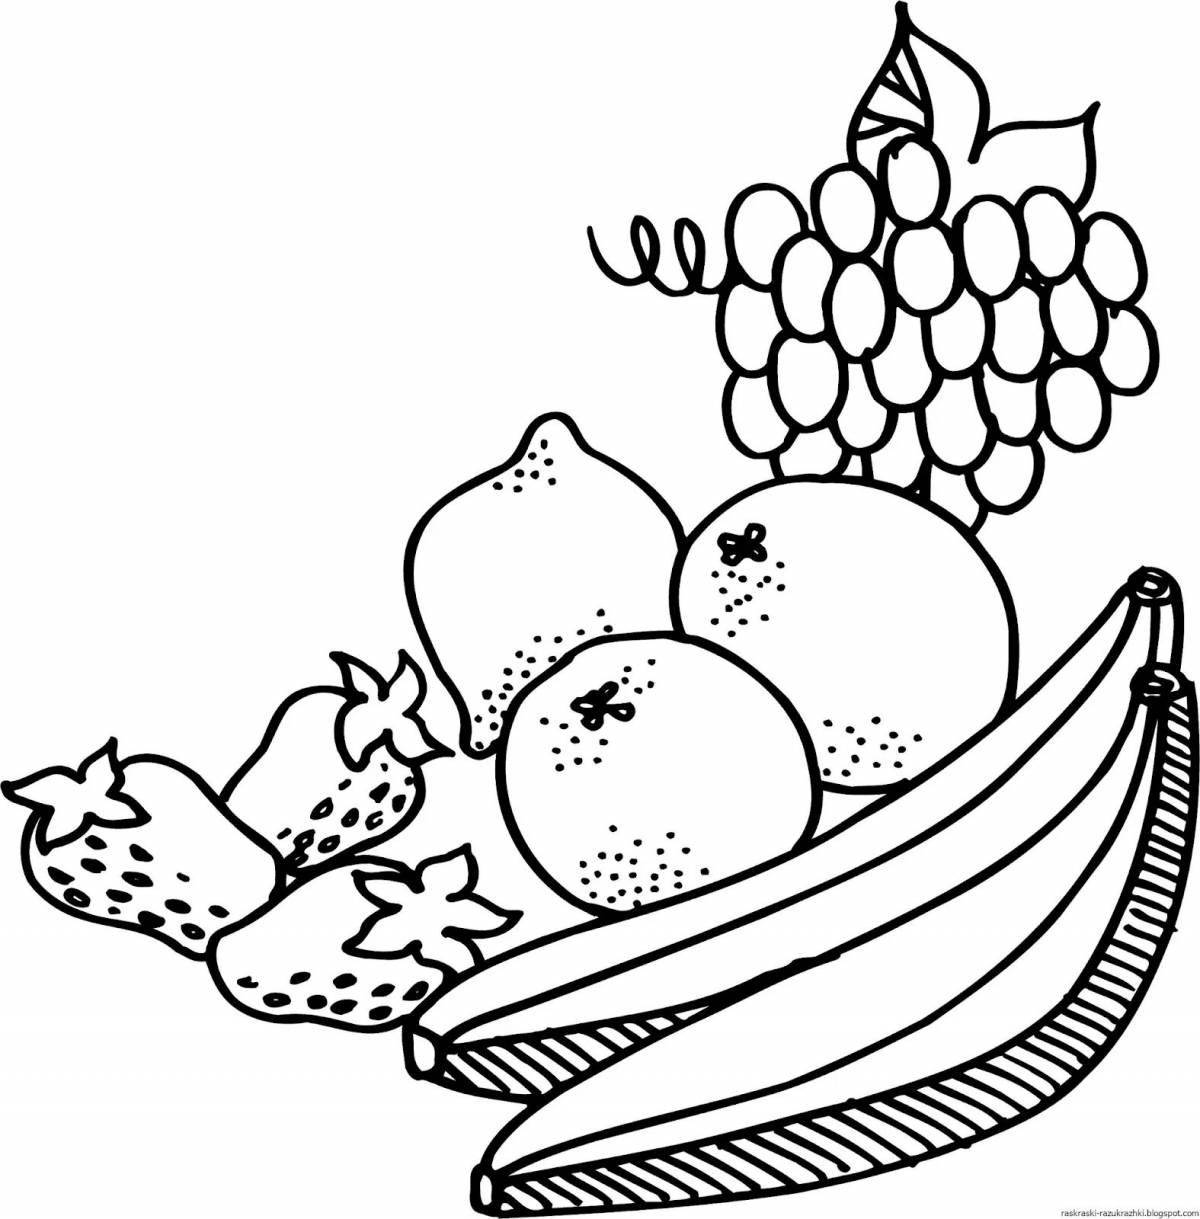 Healthy fruit and vegetable coloring book